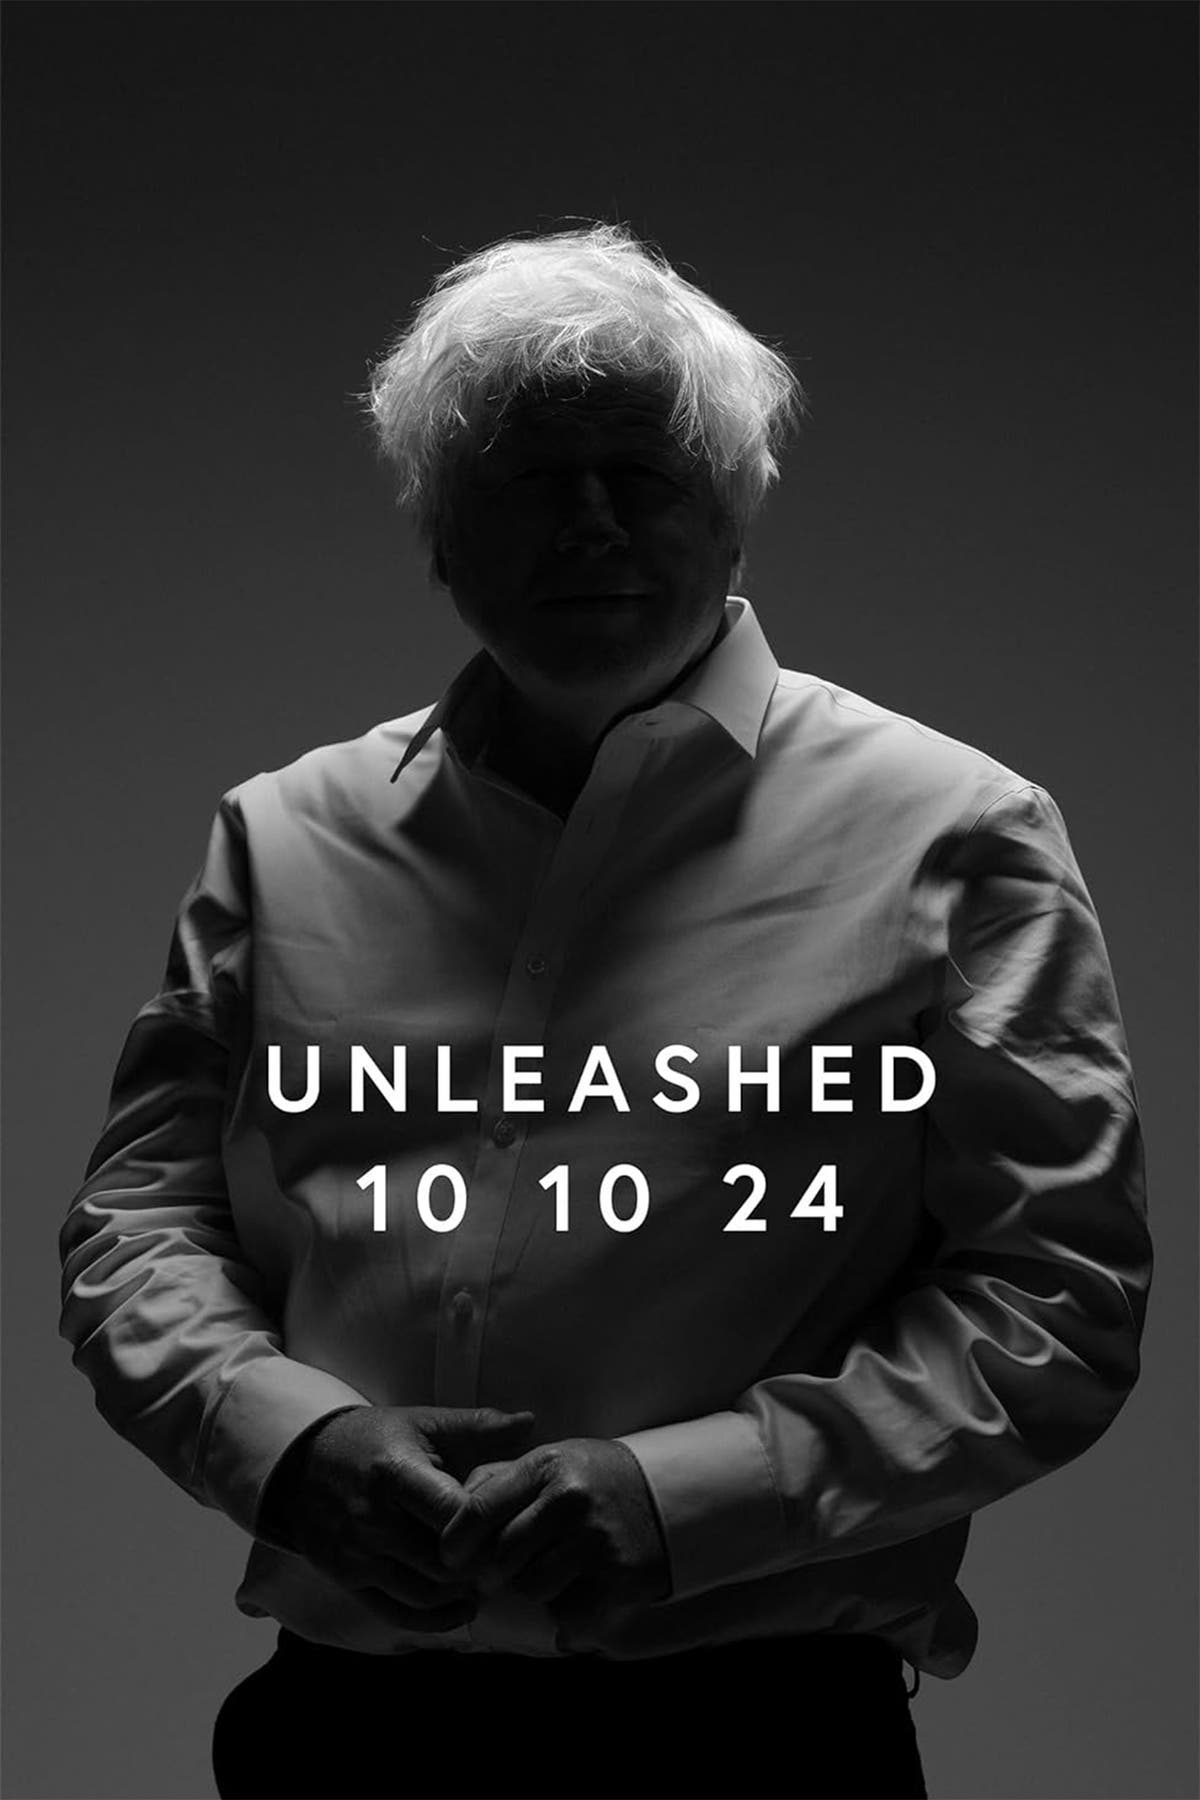 Boris Johnson announces memoir Unleashed will be published in October